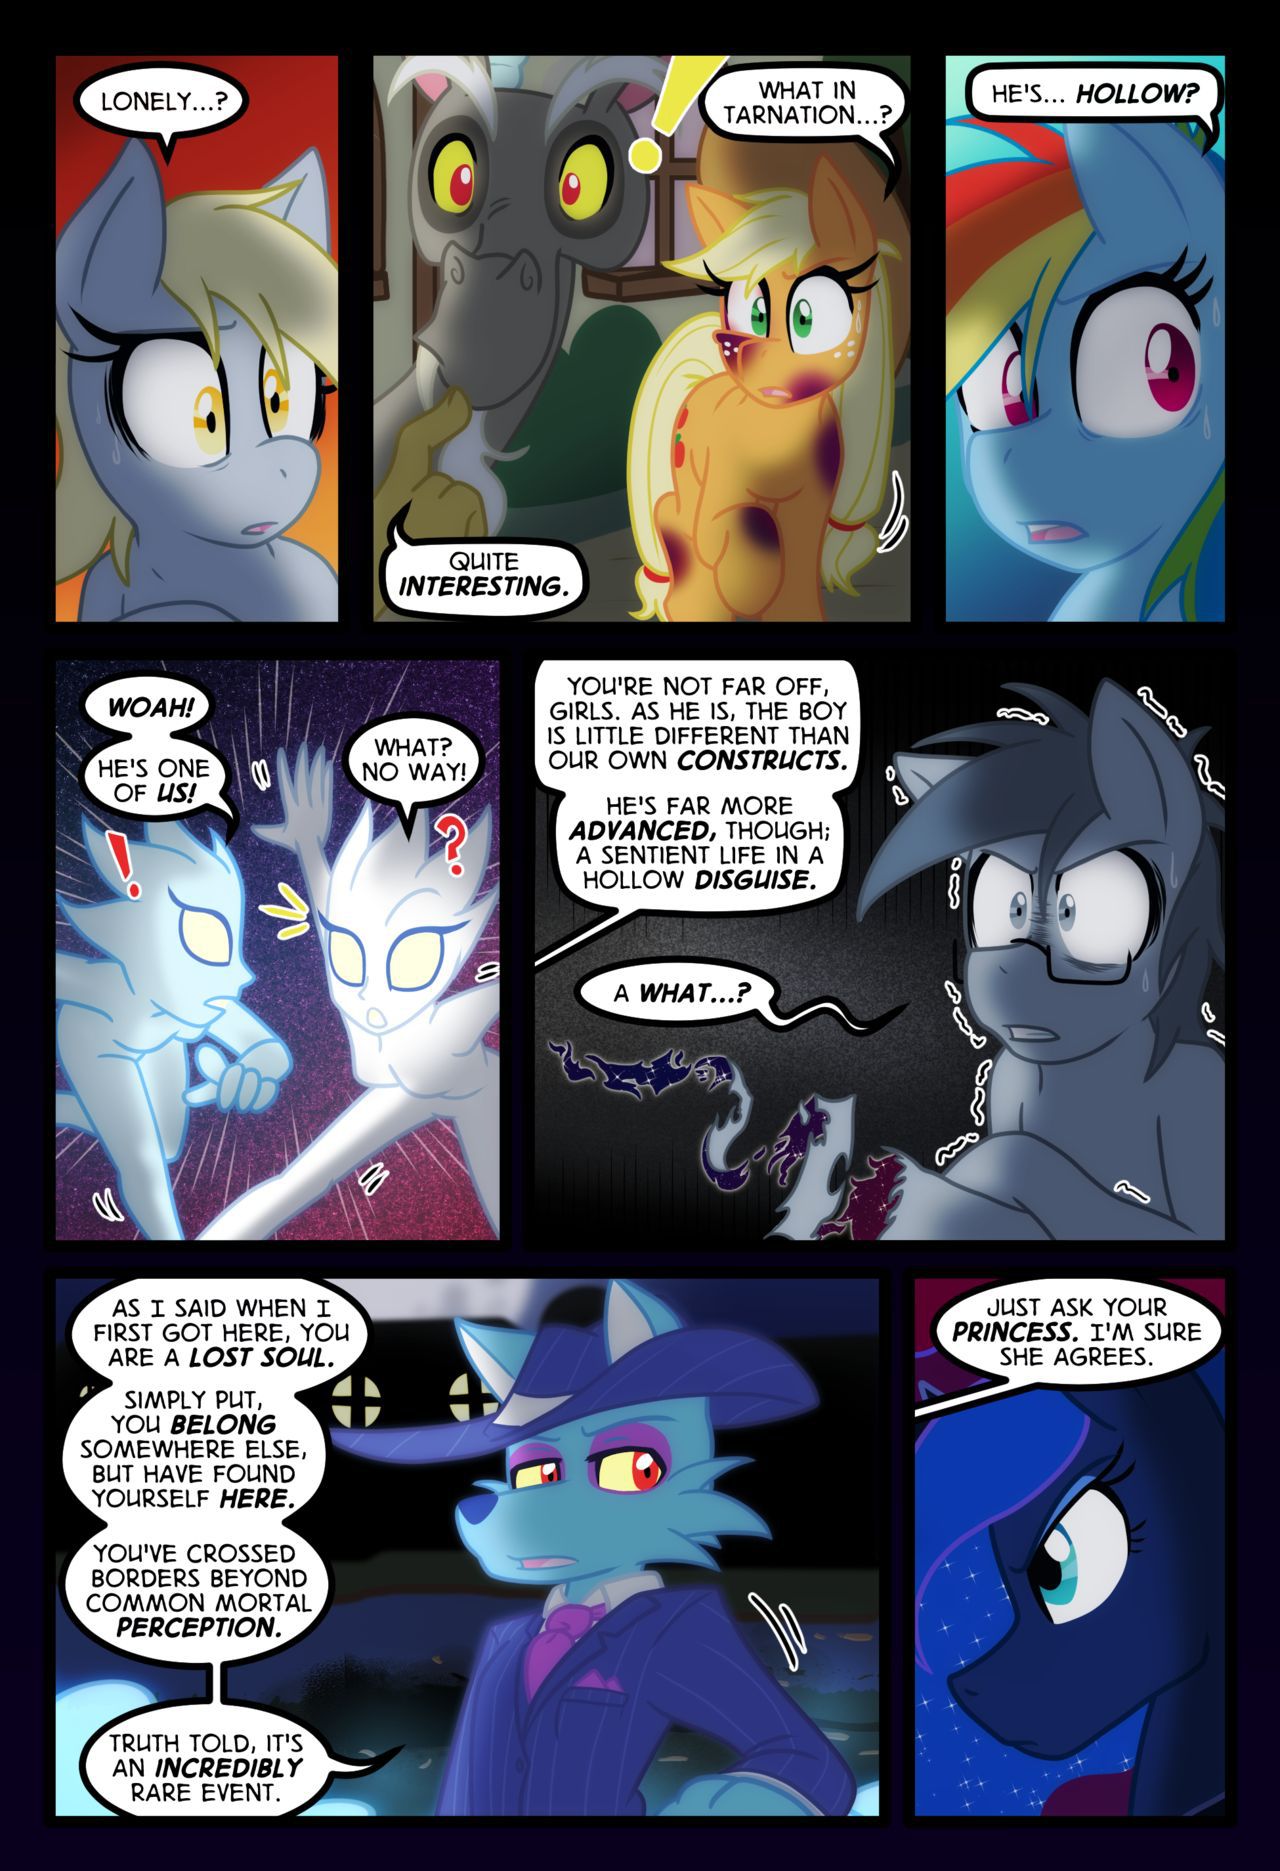 [Zaron] Lonely Hooves (My Little Pony Friendship Is Magic) [Ongoing] 176